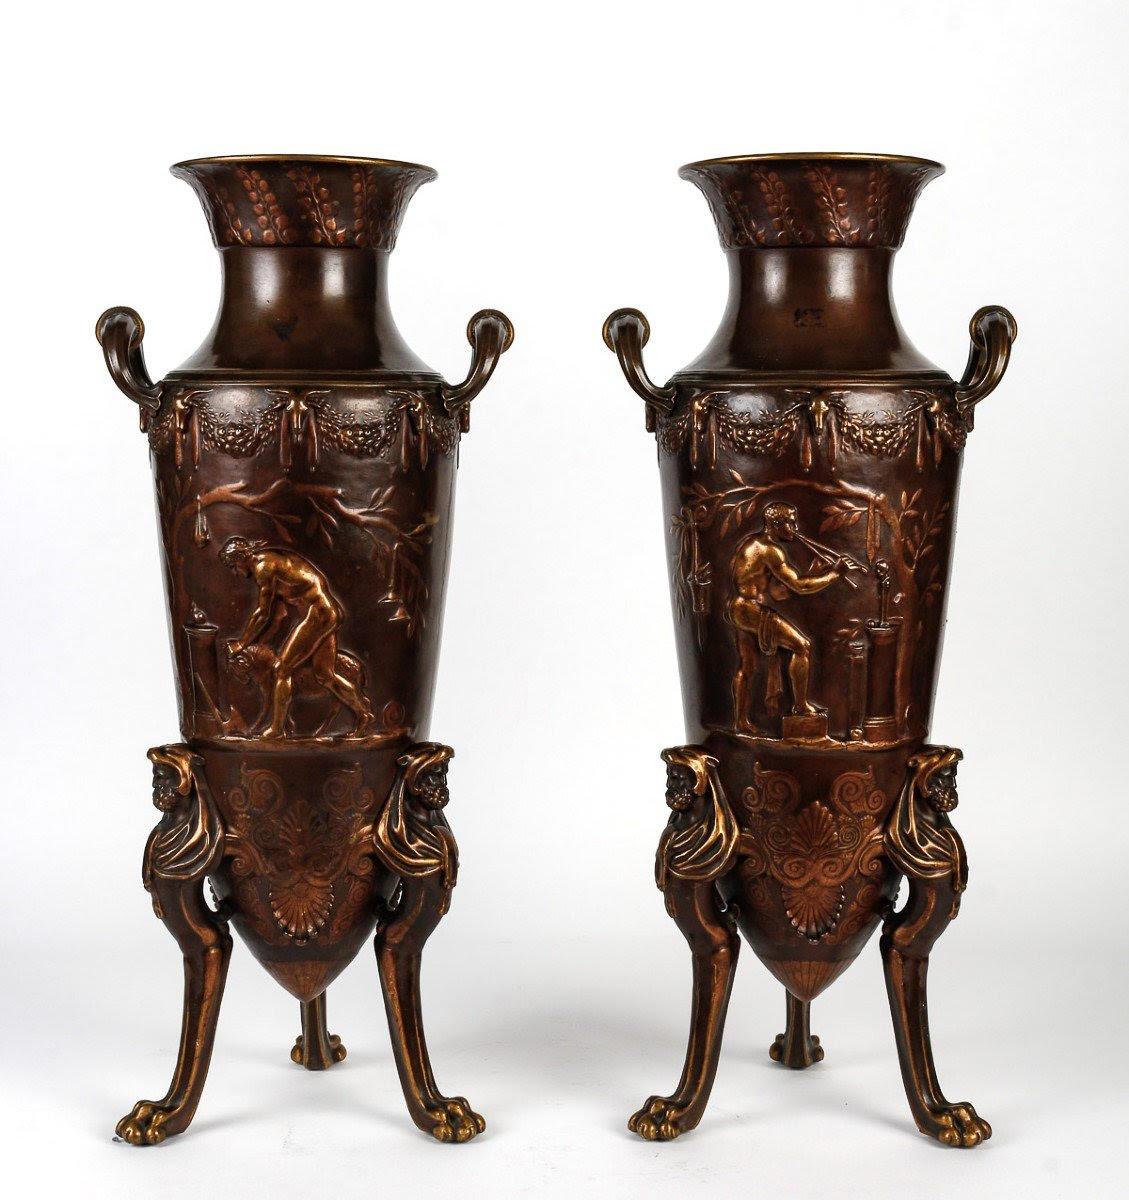 A Pair of Patinated Bronze Vases by Ferdinand Barbedienne, 19th Century. For Sale 6